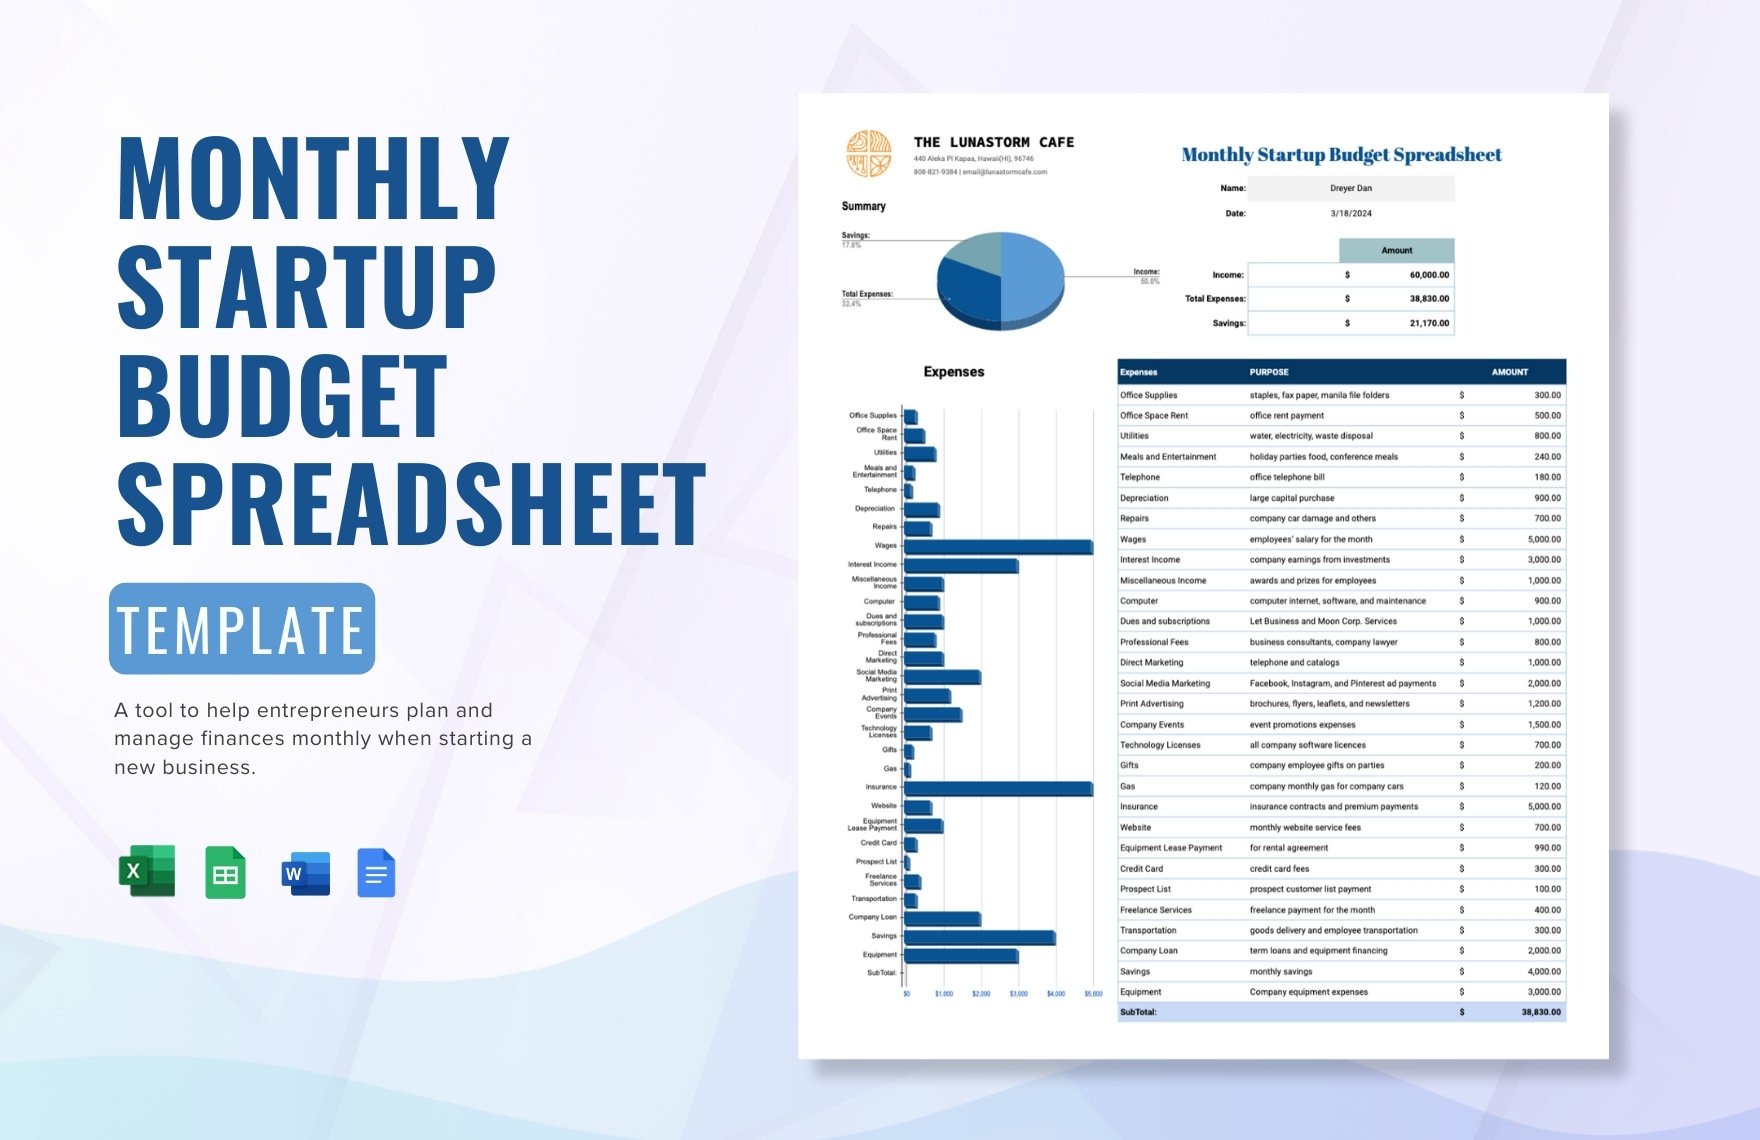 Monthly Startup Budget Spreadsheet Template in Word, Google Docs, Excel, Google Sheets